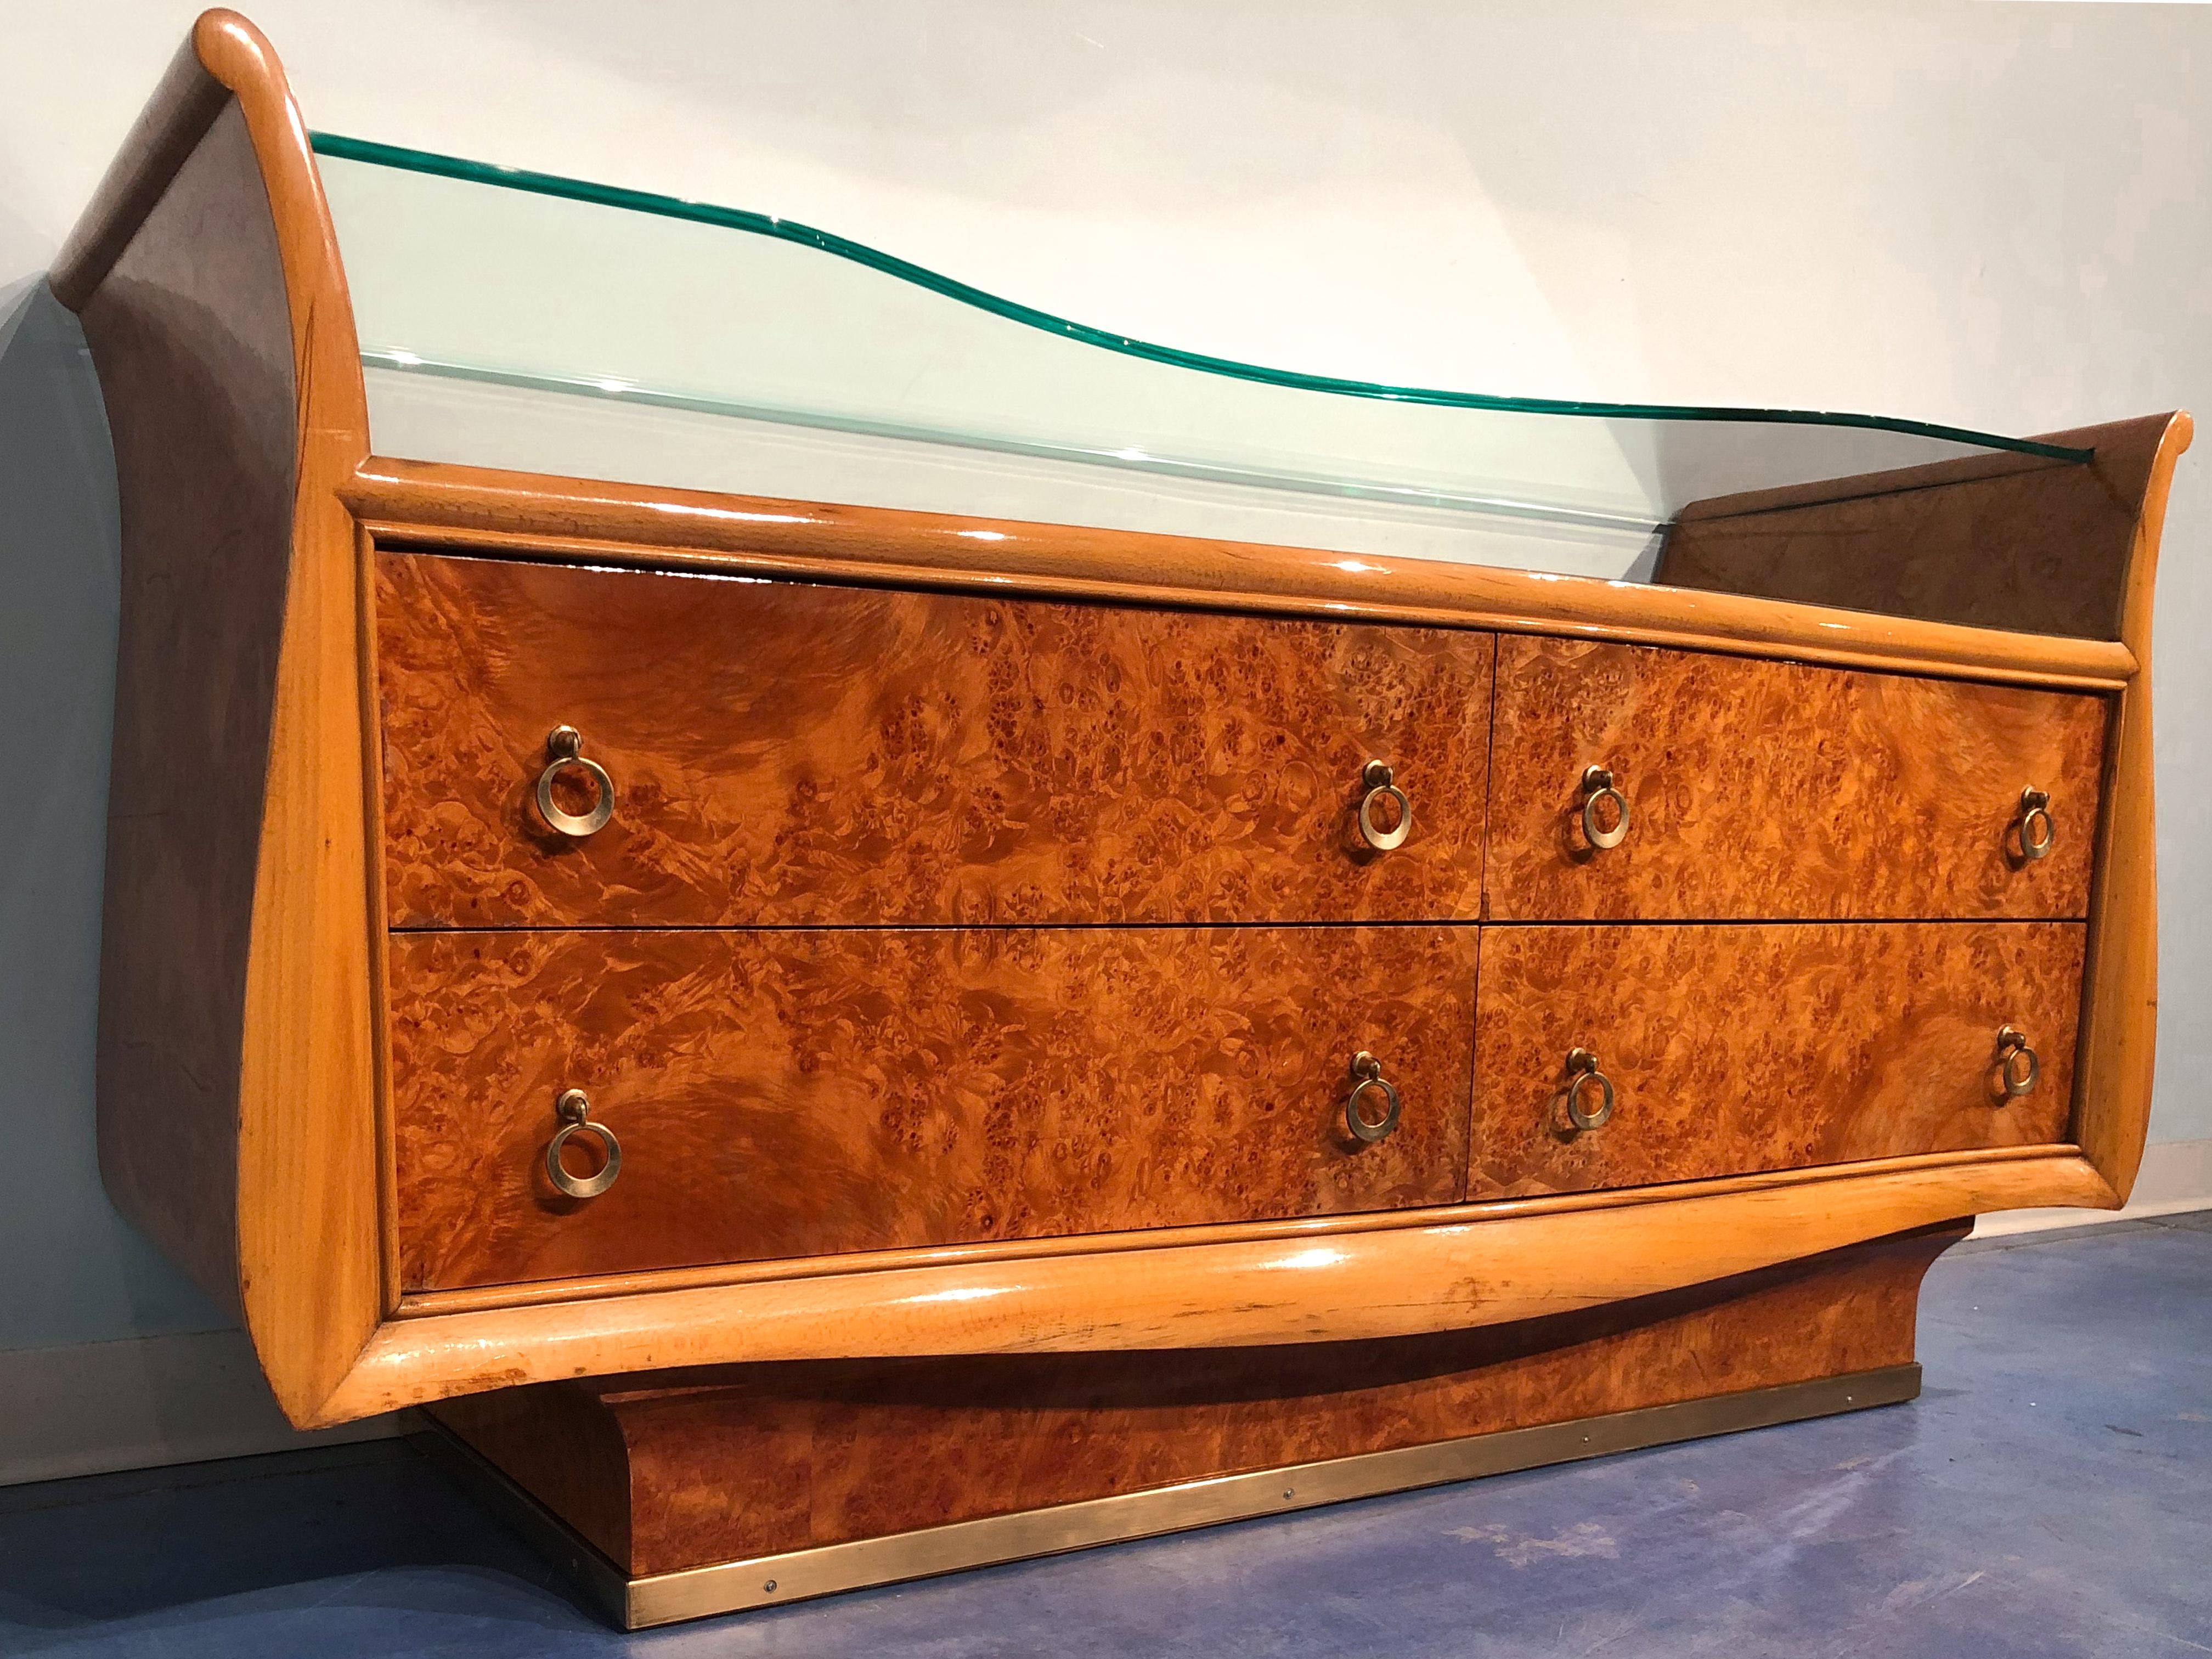 Italian Mid-Century Modern Chest of Drawers in Birch Briar Root, 1950s In Good Condition For Sale In Traversetolo, IT